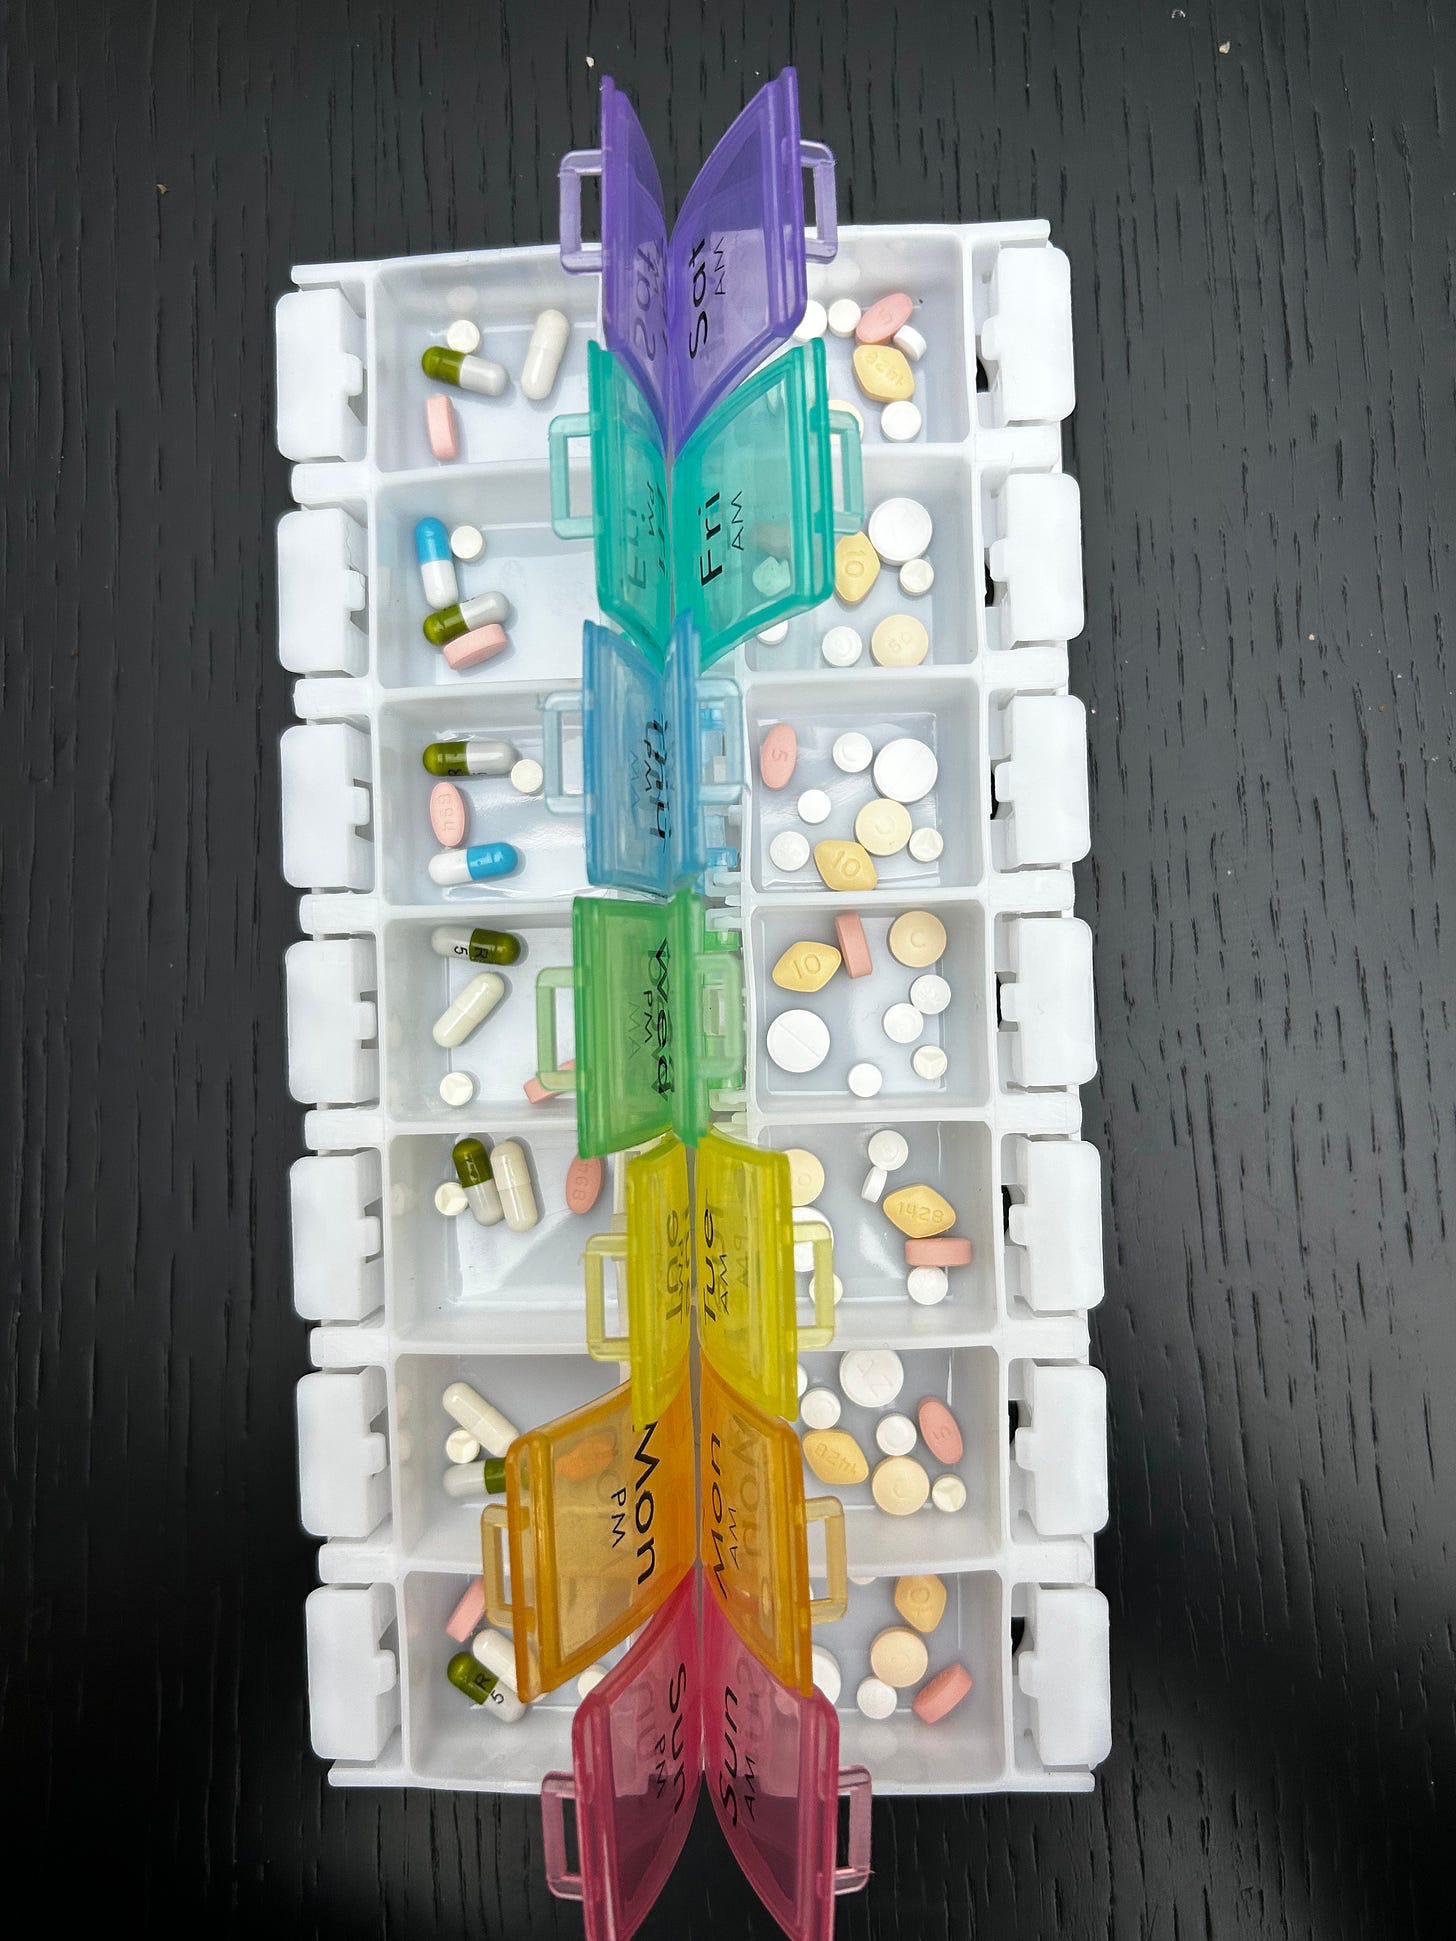 Pill box full of different tablets, with rainbow-colourd lids that are open.